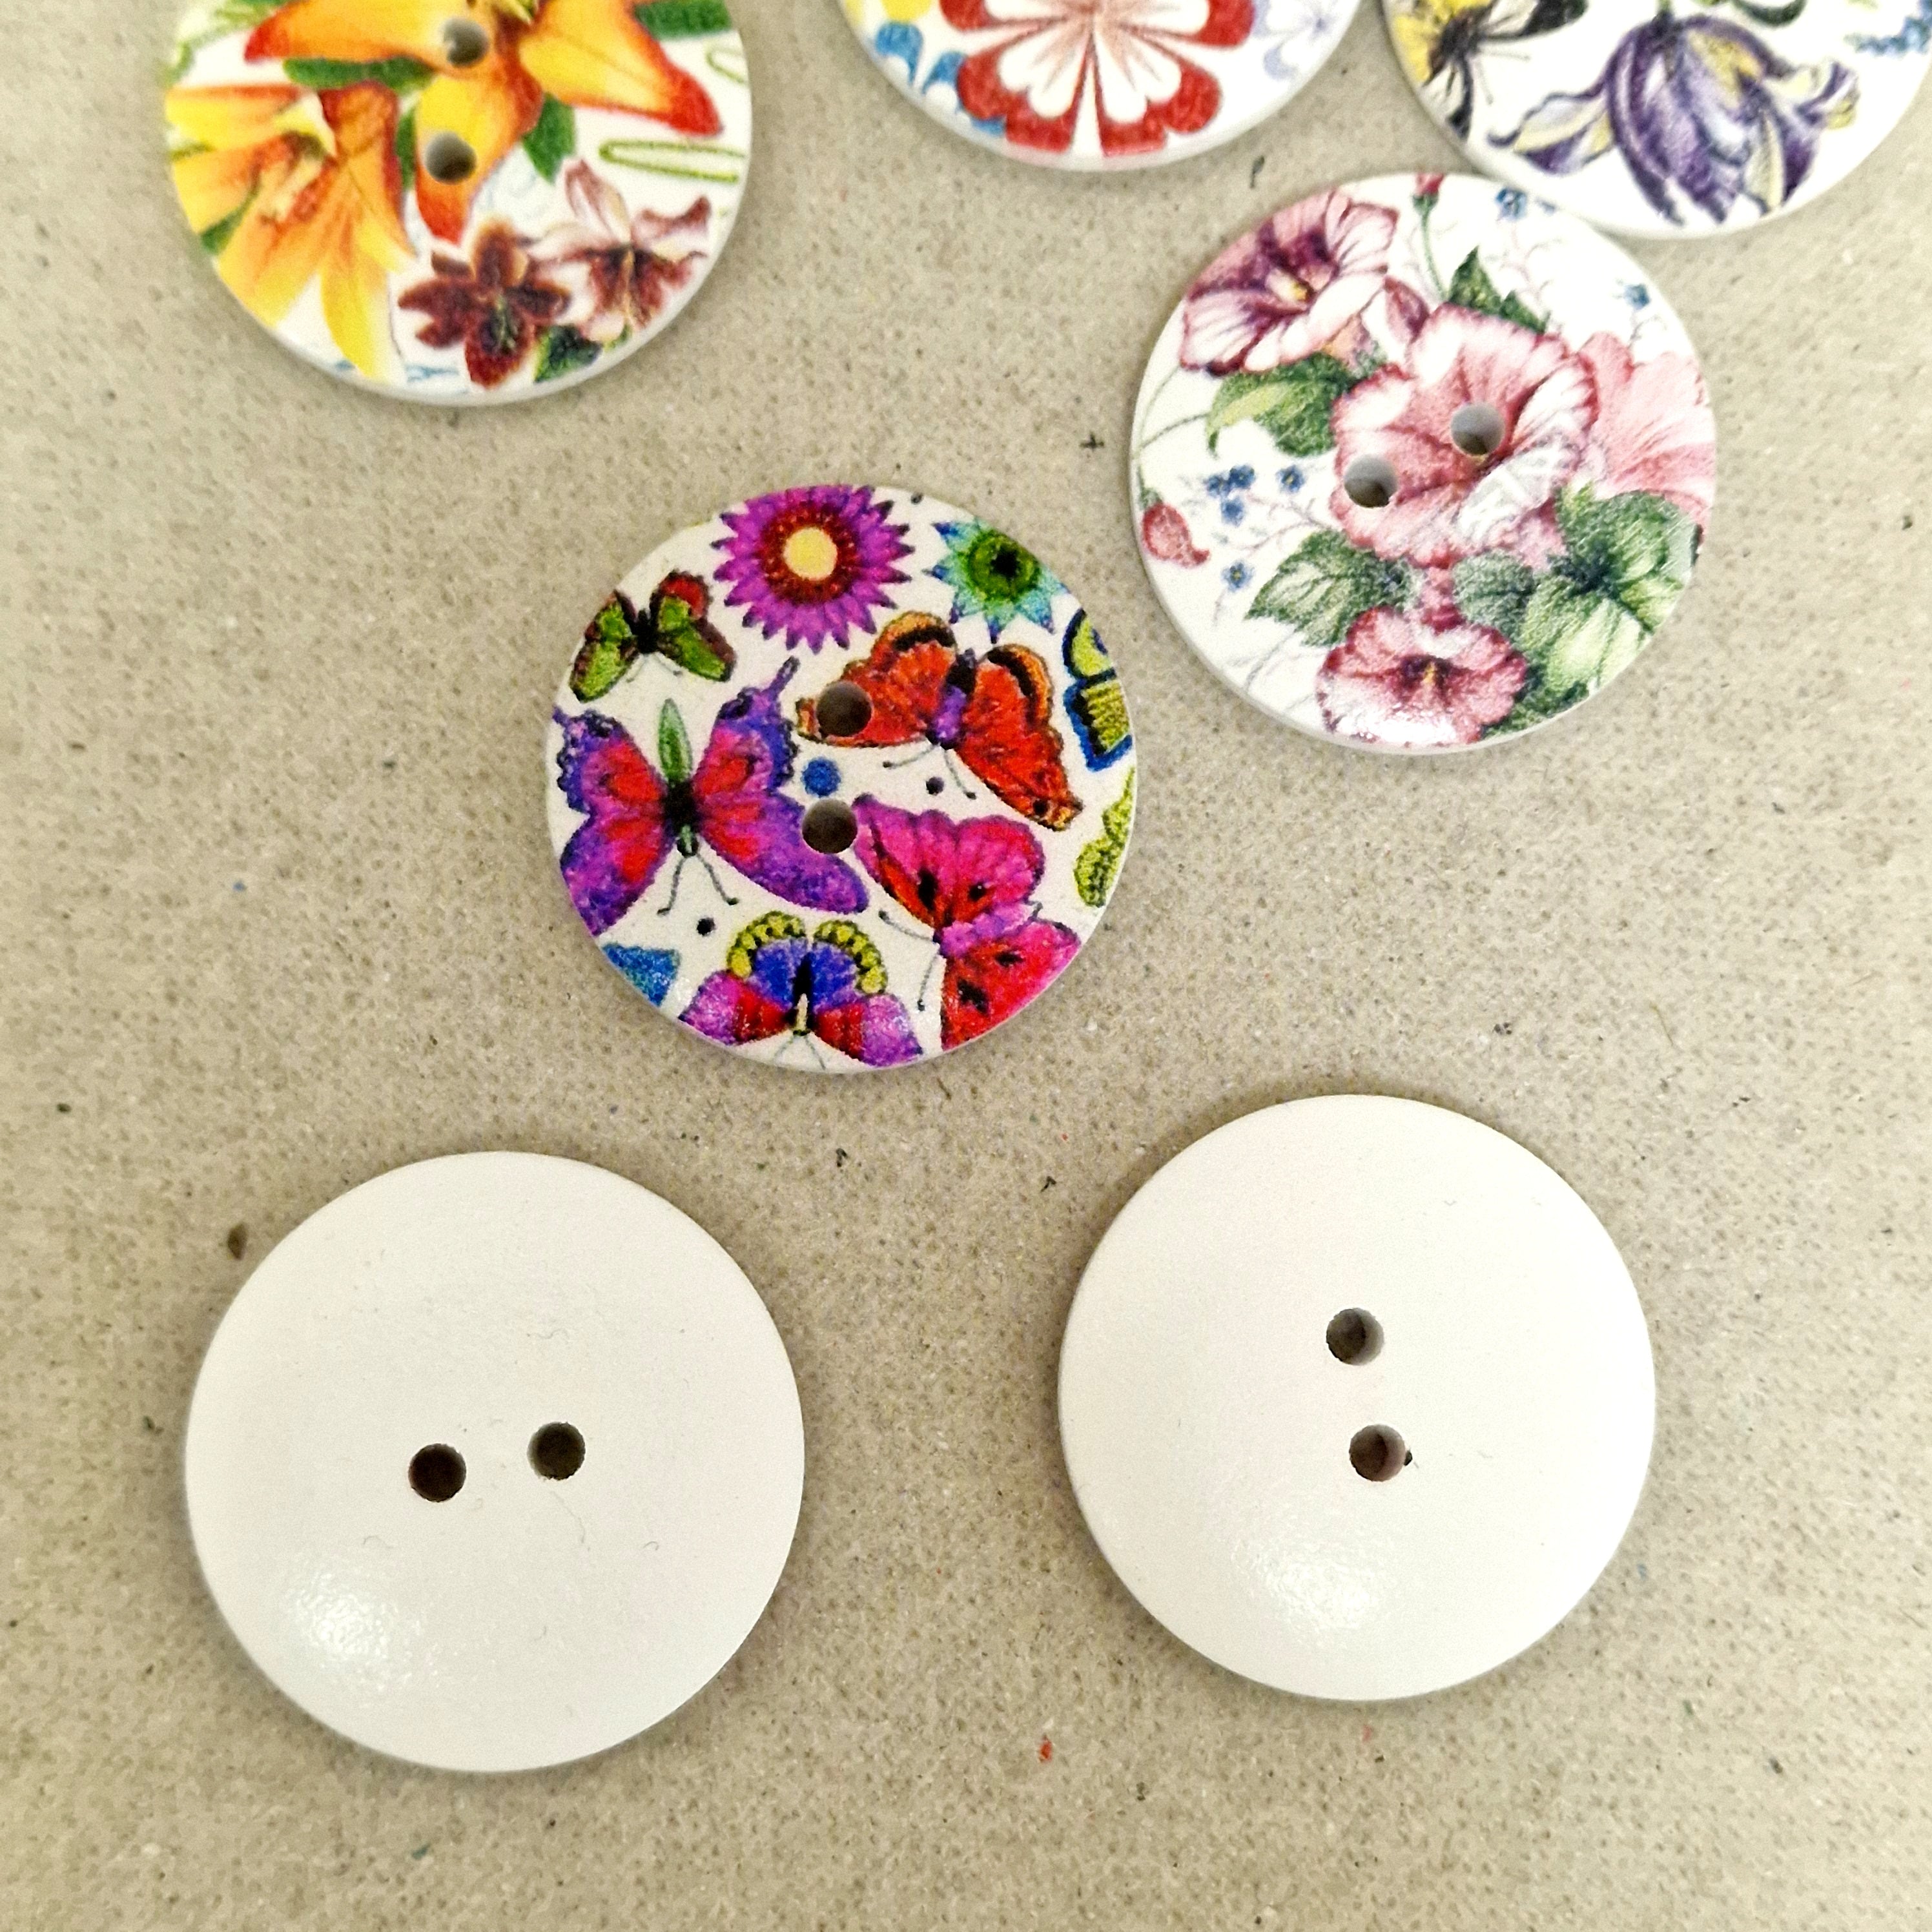 MajorCrafts 12pcs 30mm Mixed Floral Patterns 2 Holes Large Wooden Sewing Buttons